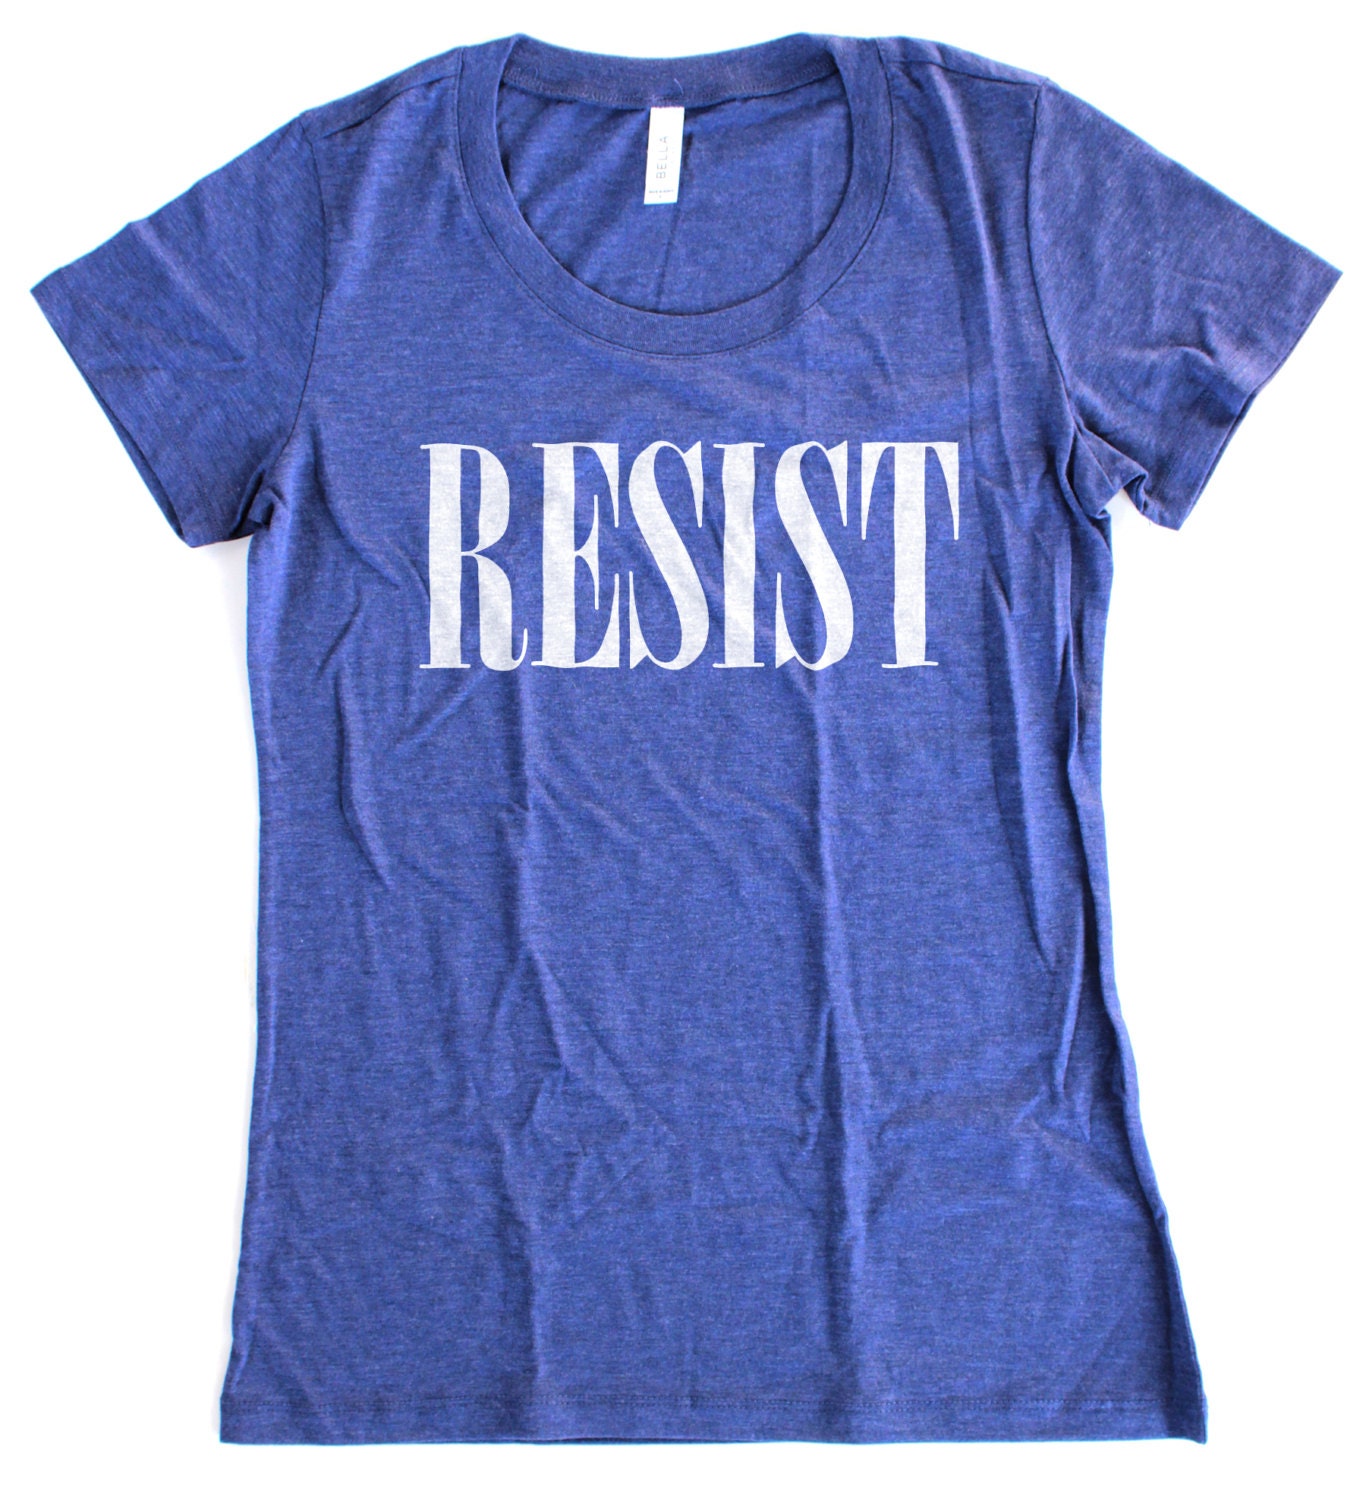 Resist T-Shirt WOMENS Available in S M L XL and five shirt | Etsy